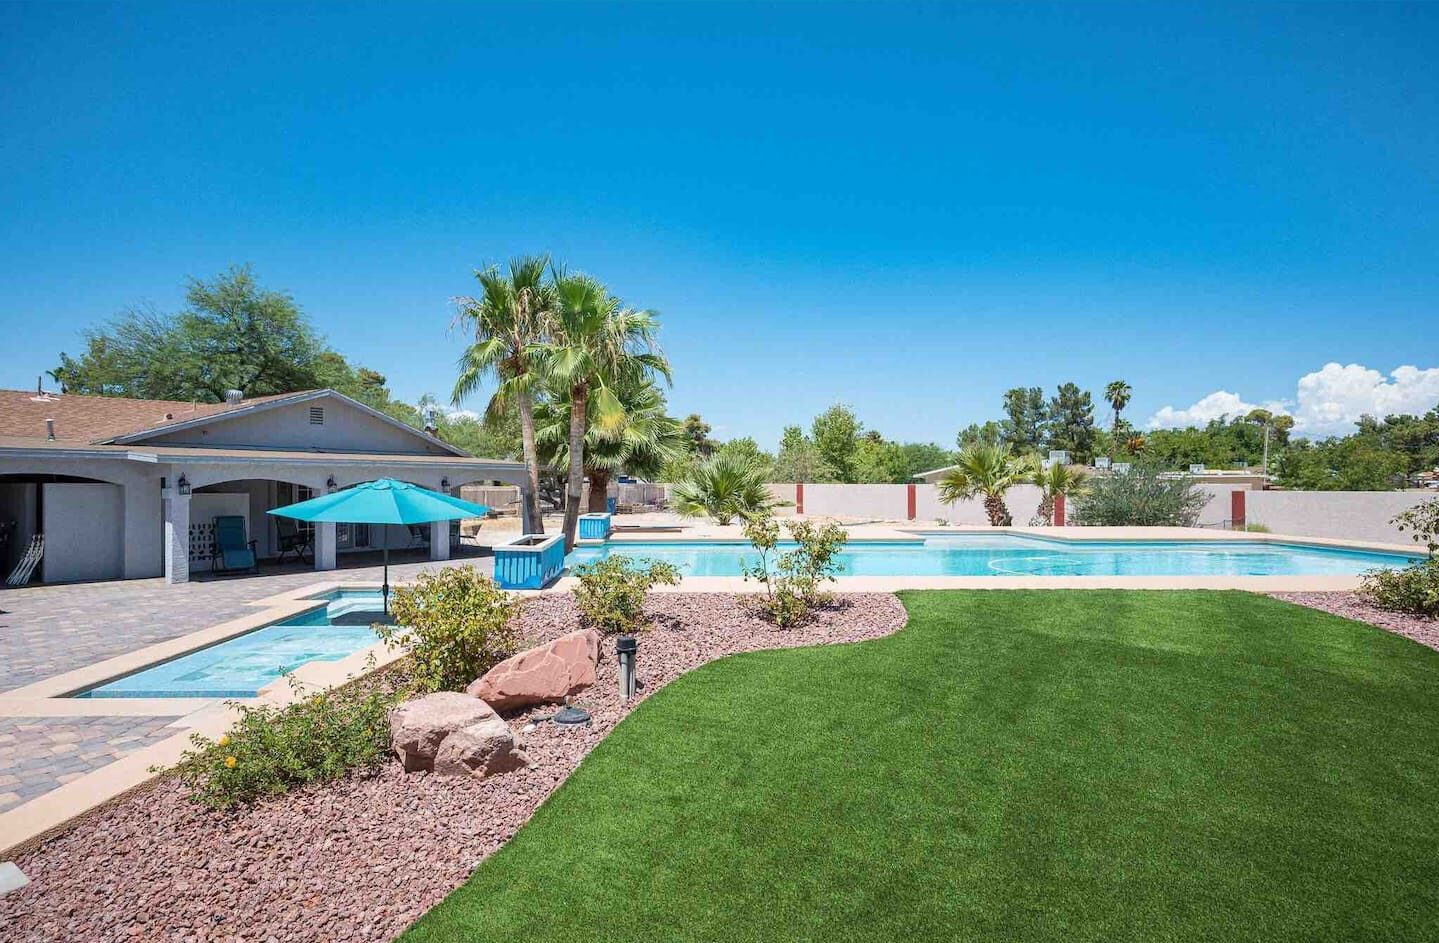 Cozy las vegas nook with pool and sun tanning area, one of the best Airbnbs in Las Vegas